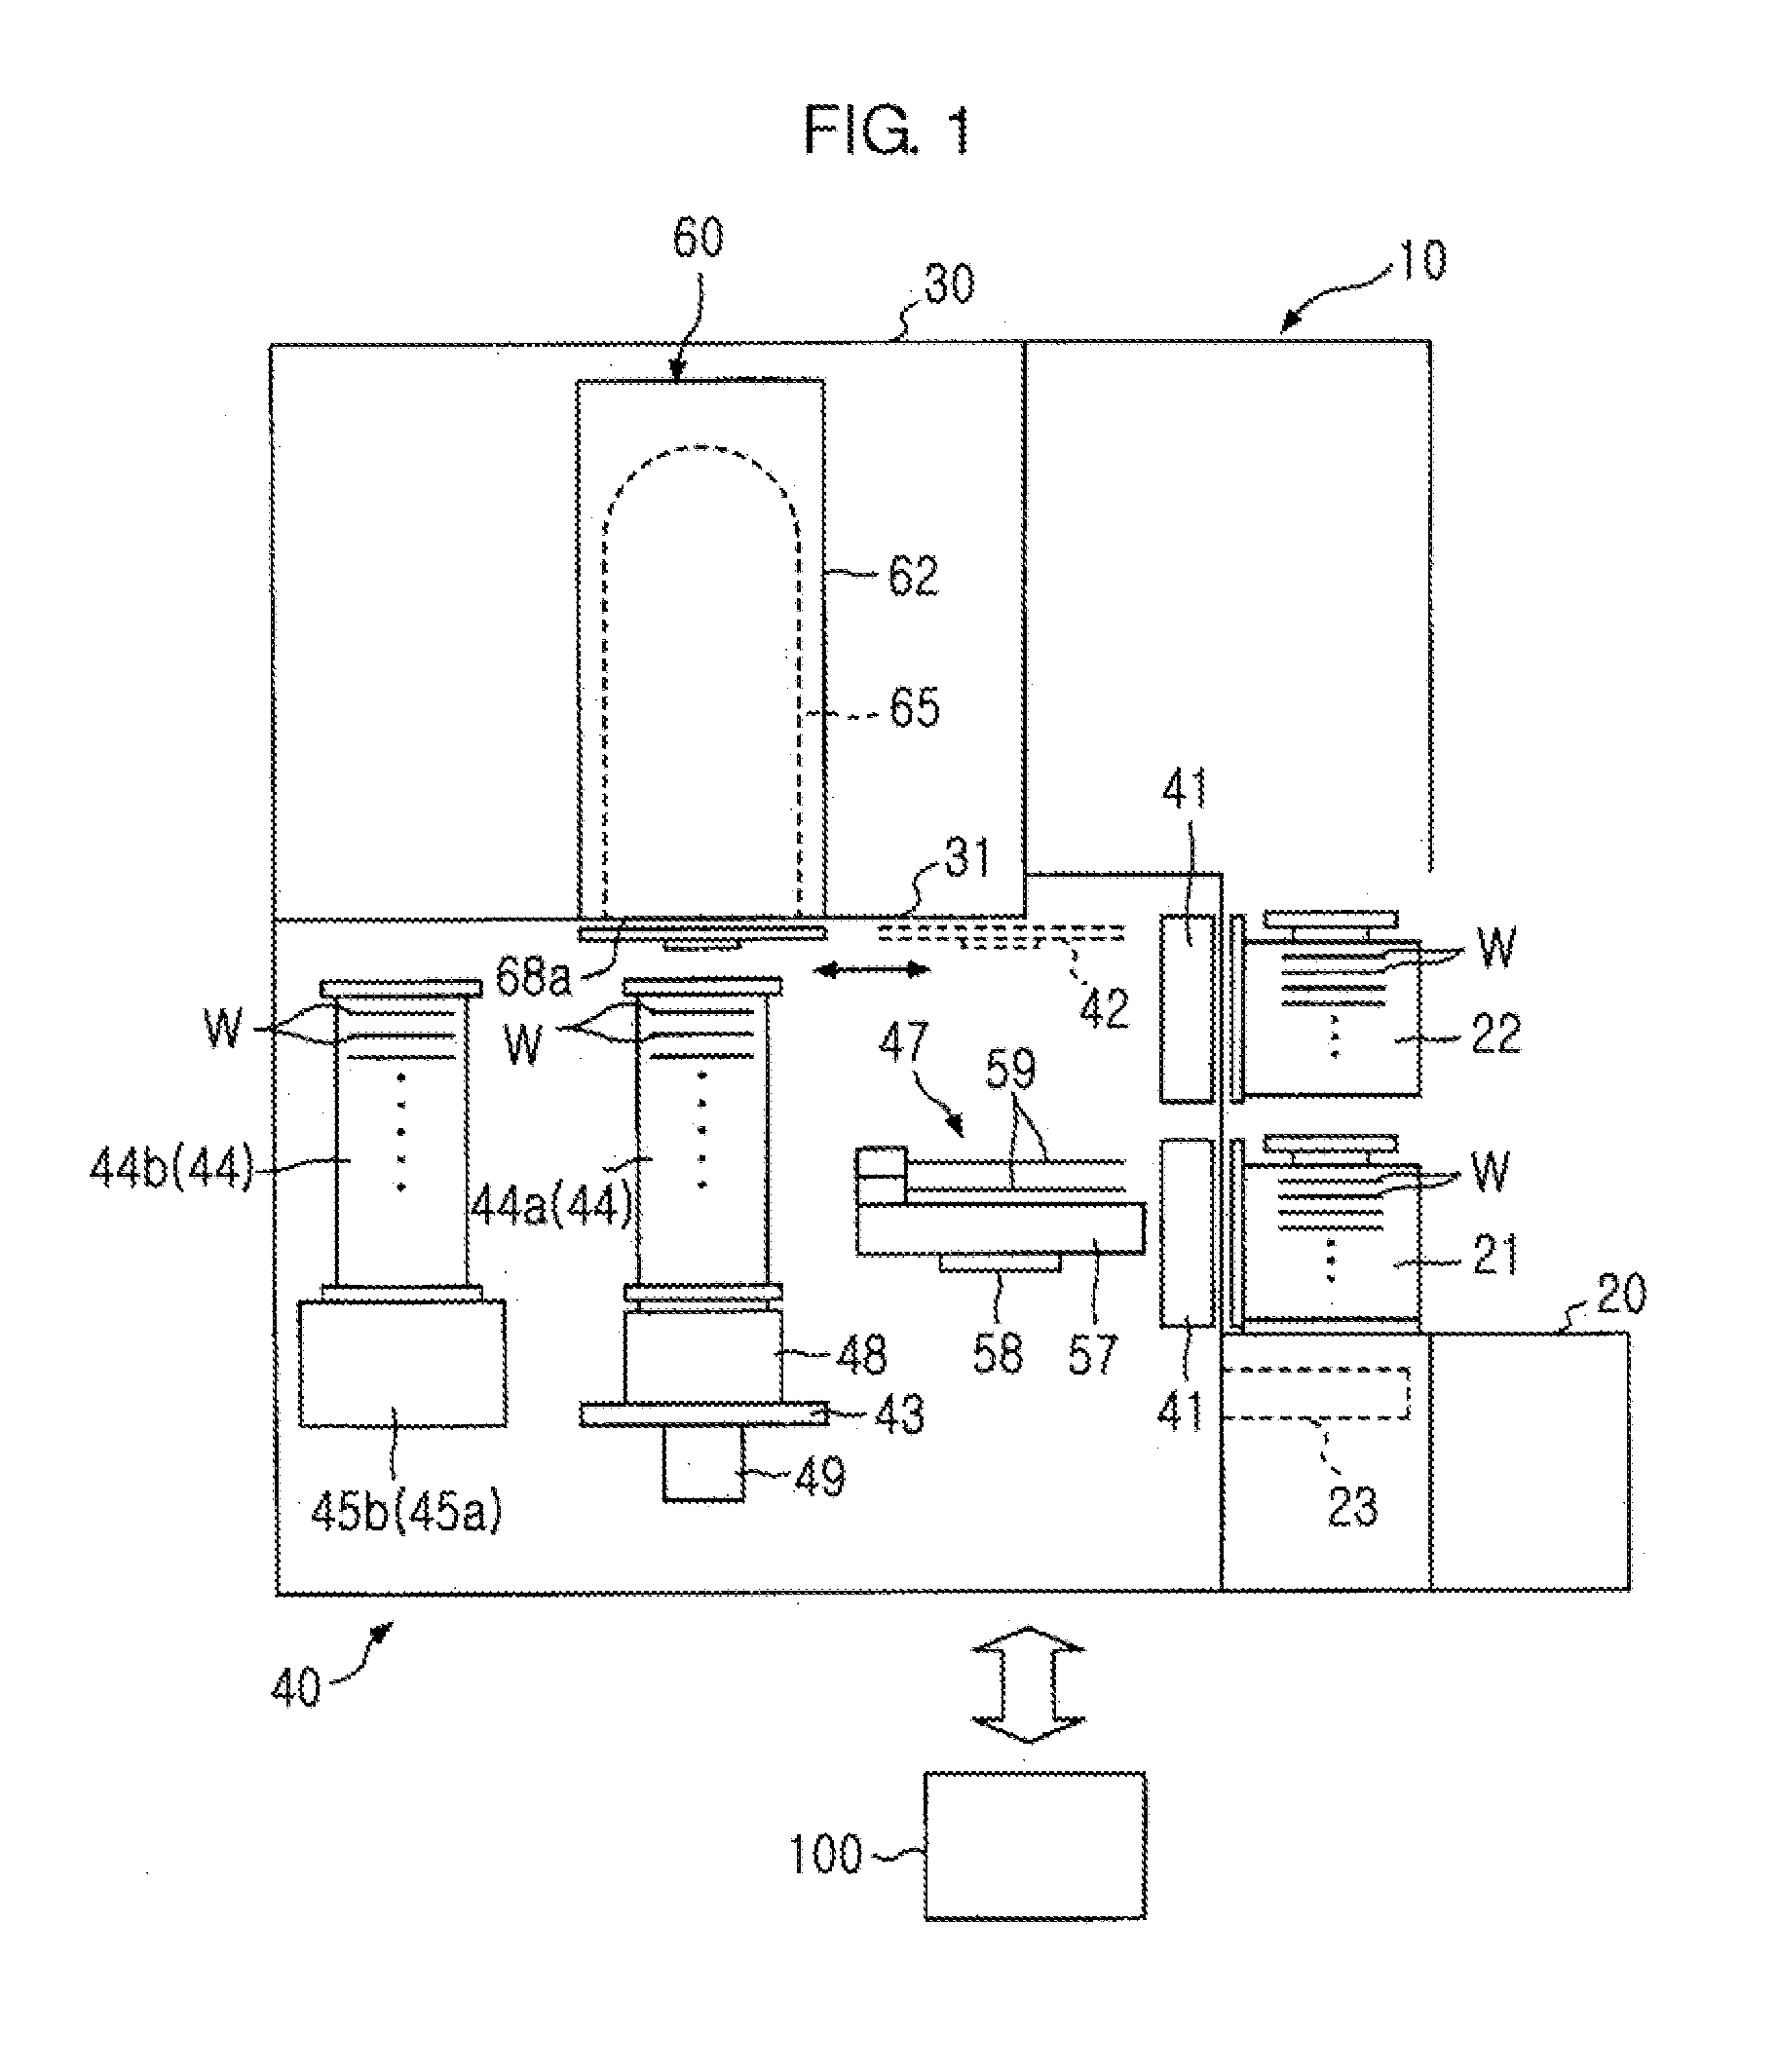 Thermal treatment apparatus, temperature control system, thermal treatment method, temperature control method, and non-transitory computer readable medium embodied with program for executing the thermal treatment method or the temperature control method